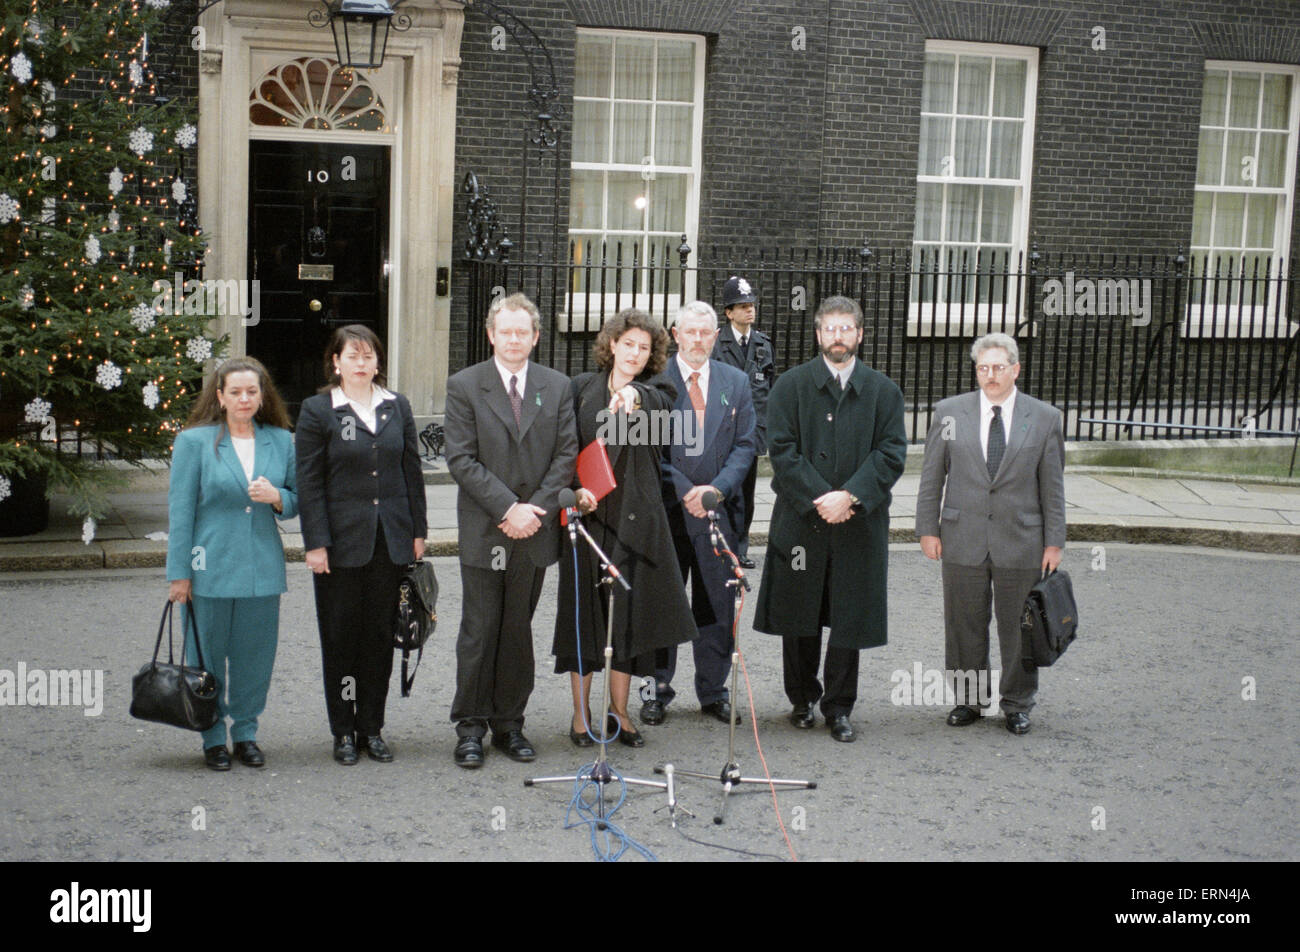 Sinn Fein leader Gerry Adams flanked by his party deputies faces the media outside Number 10 Downing Street before the peace talks with the Prime Minister Tony Blair. In the picture are Martin McGuinness  (third left), Gerry Adams spokeswoman Lucilita Bhreatnach (centre), Martin Ferris (third from the right) and  Gerry Adams (second right). 11th December 1997. Stock Photo